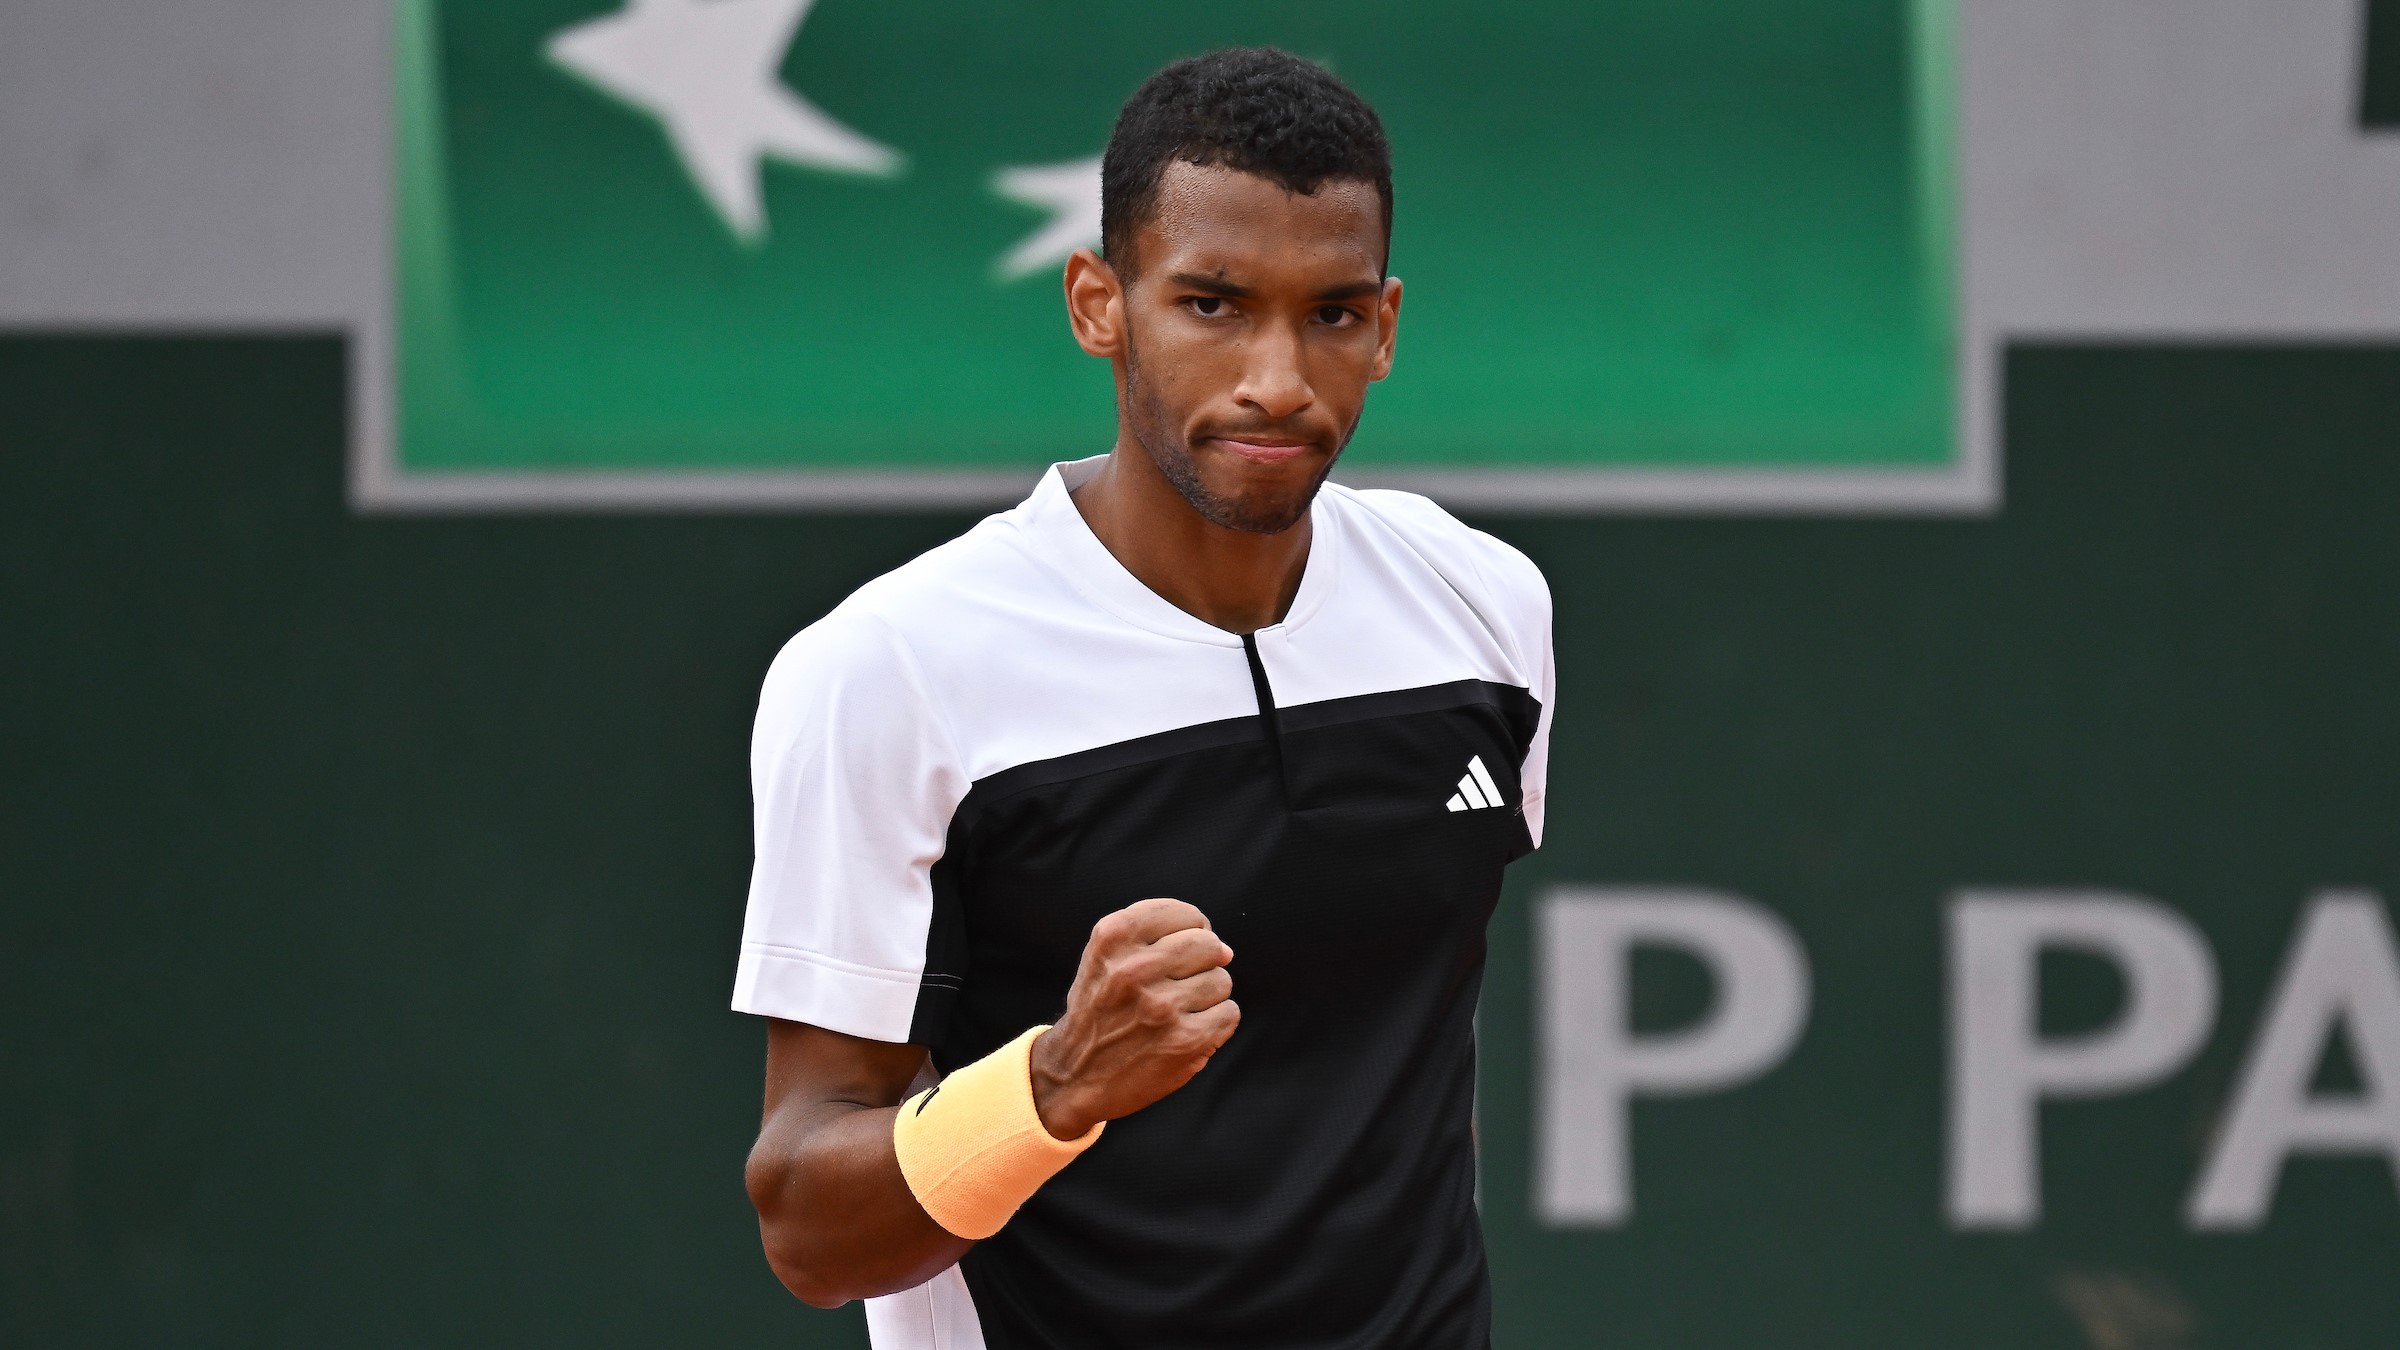 Felix Auger-Aliassime pumps his fist. He easily wrapped up his third-round win over Ben Shelton at the French Open on Saturday. Denis Shapovalov and Bianca Andreescu will also play.